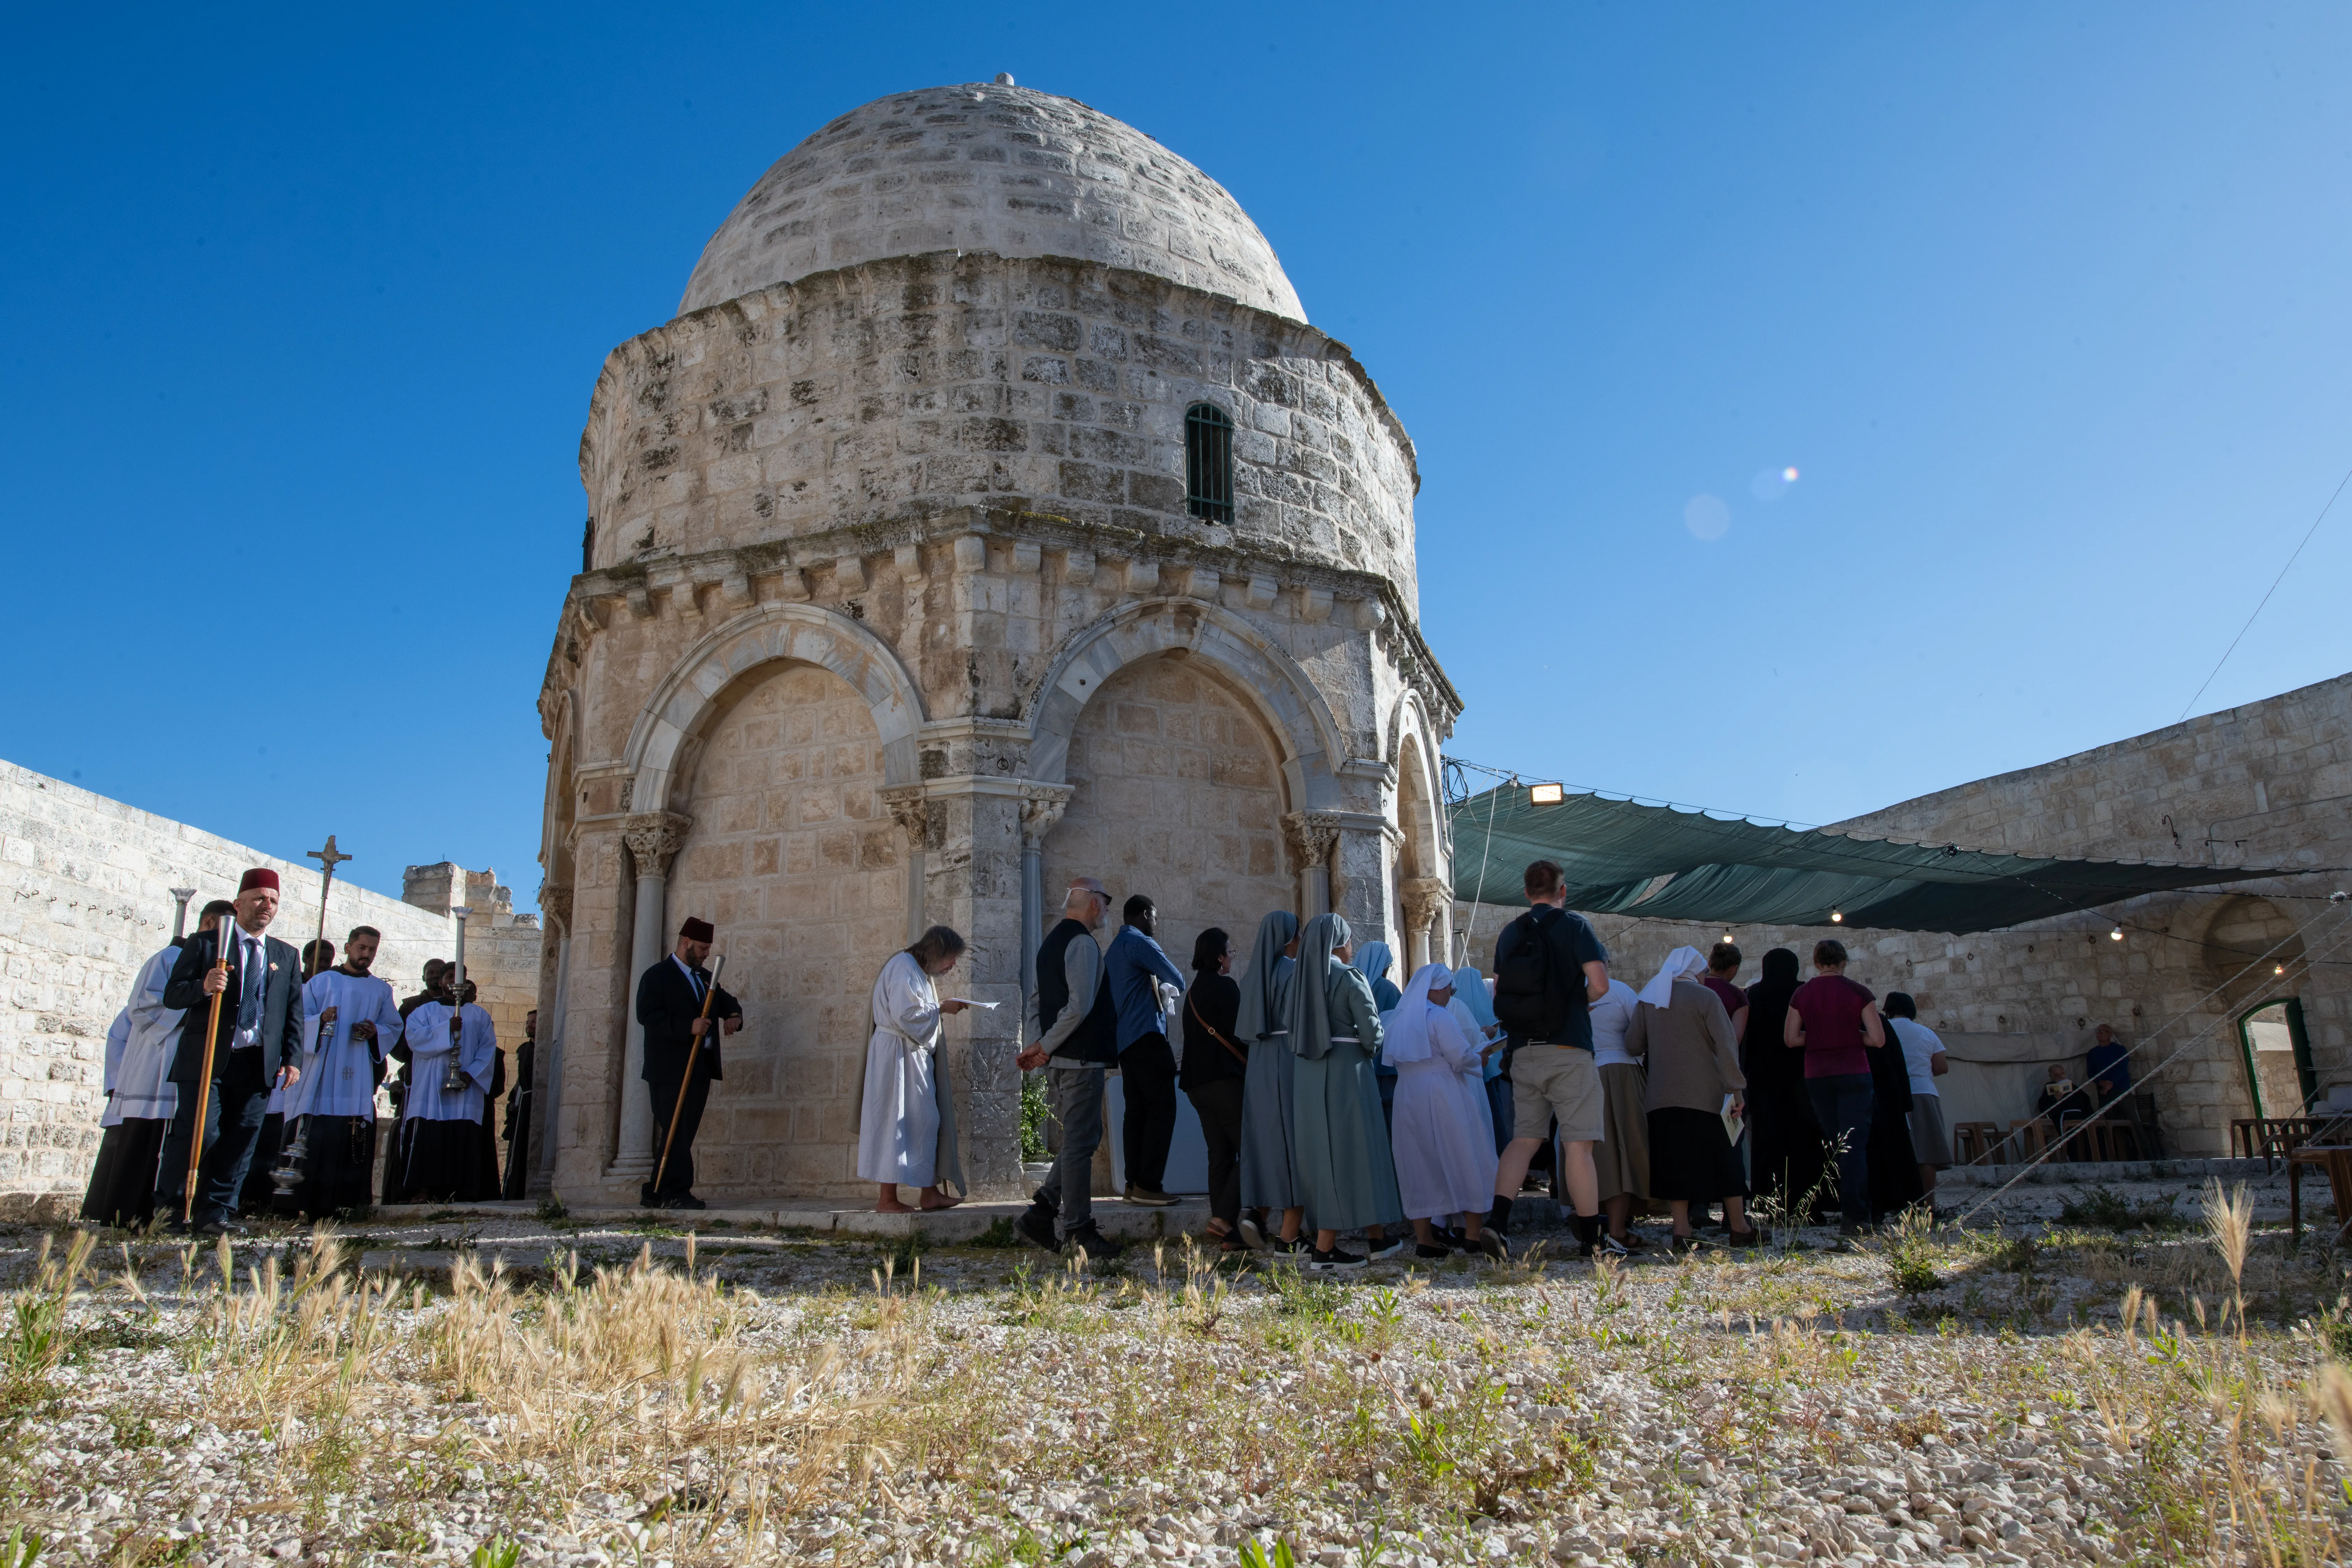 An external view of the Chapel of the Ascension on the Mount of Olives in Jerusalem during the procession of the Franciscan friars after the first vespers of the Ascension solemnity on May 8, 2024. The procession circled the chapel three times. / Credit: Marinella Bandini